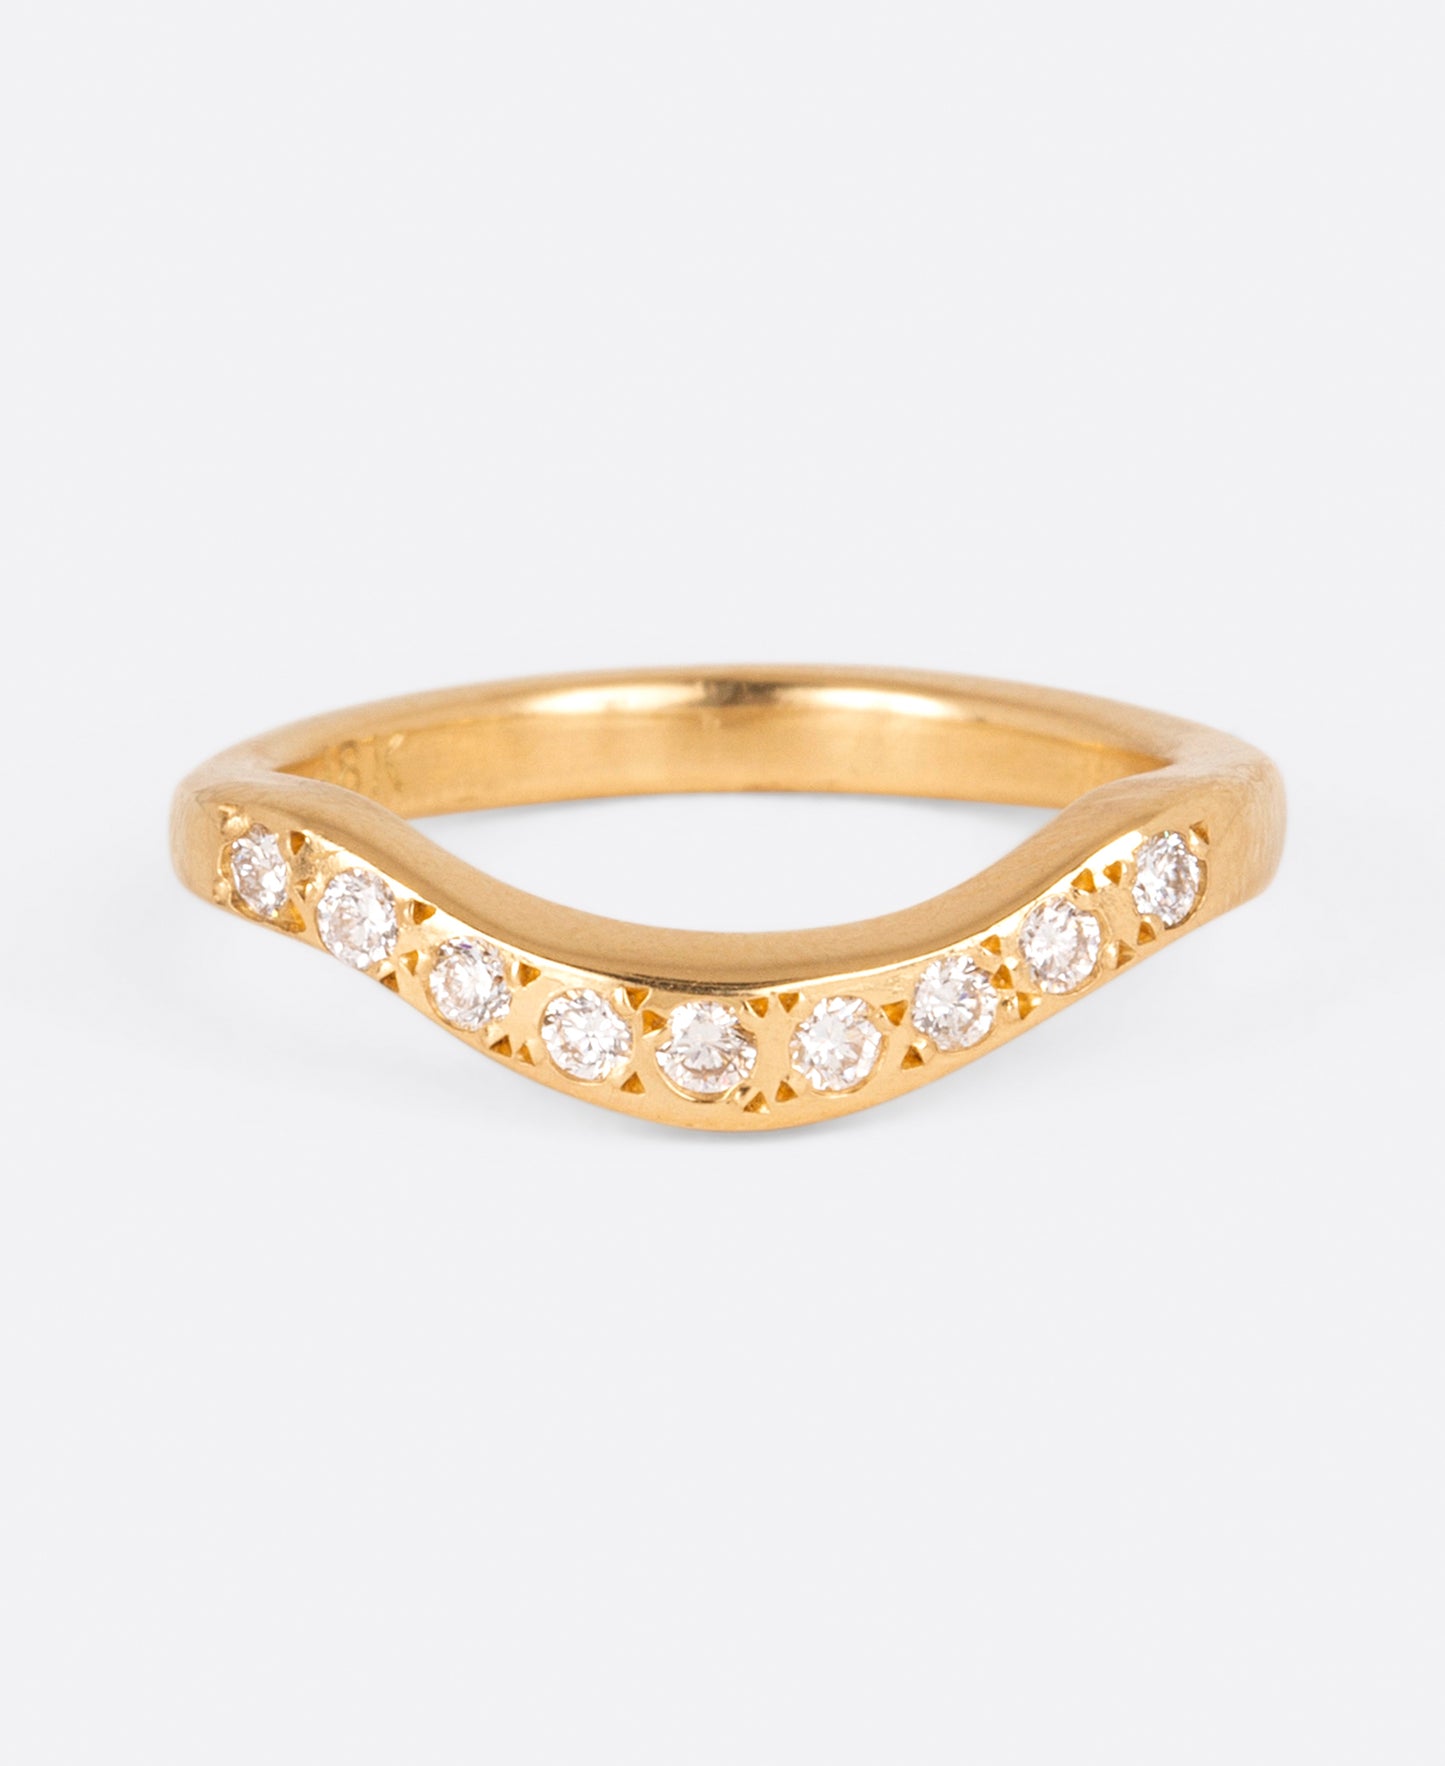 A curved yellow gold band with nine round white diamonds, shown from the front.